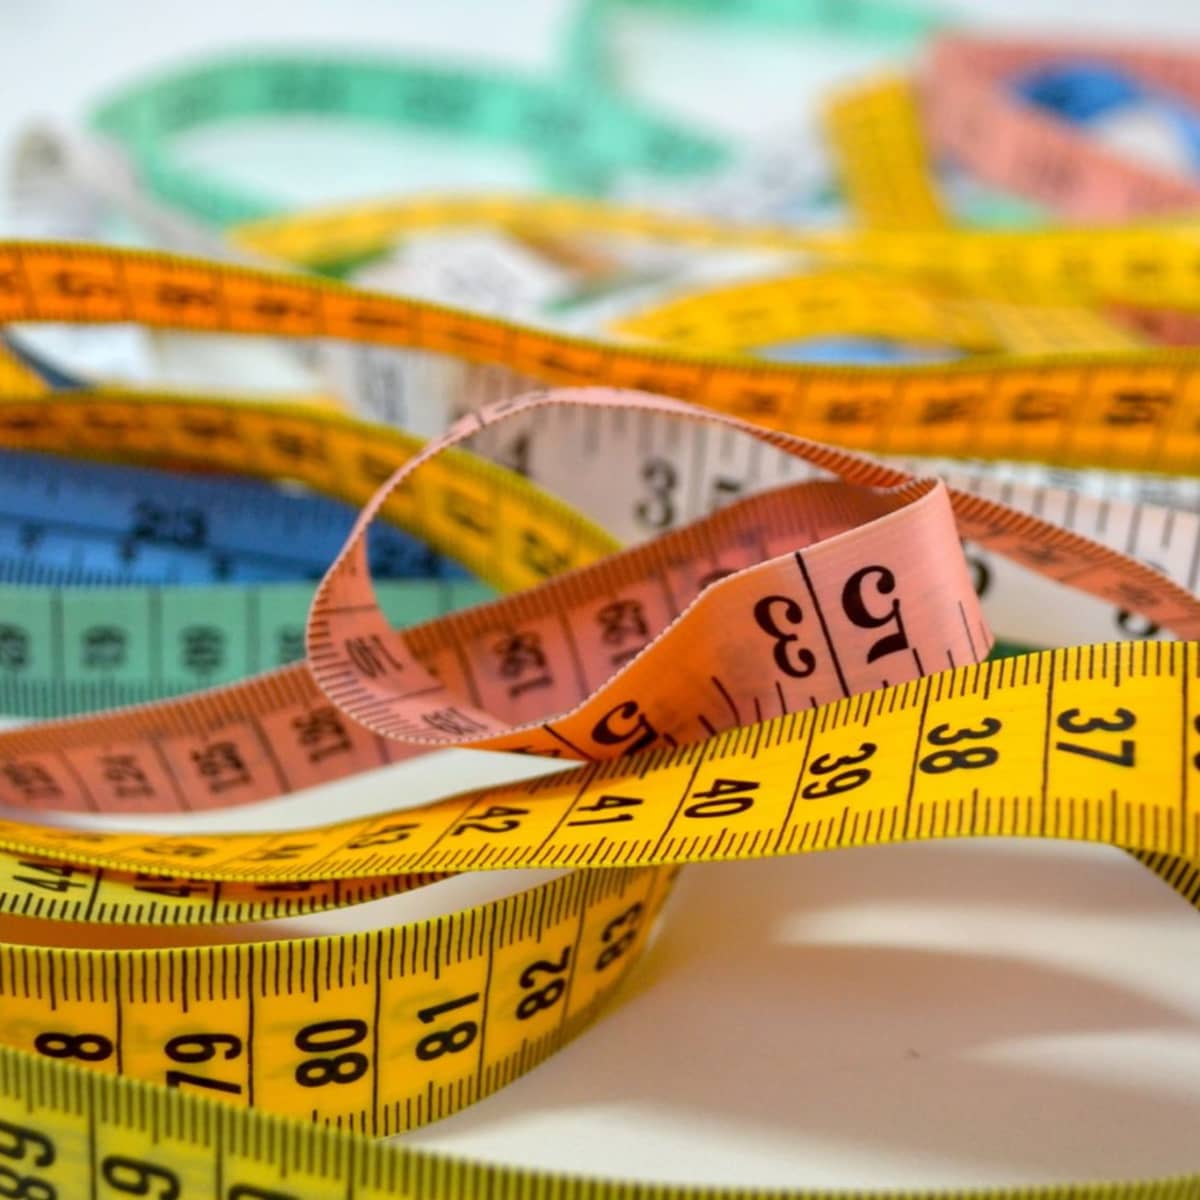 How to use a body tape measure and why 5cm is missing – Fitness Health